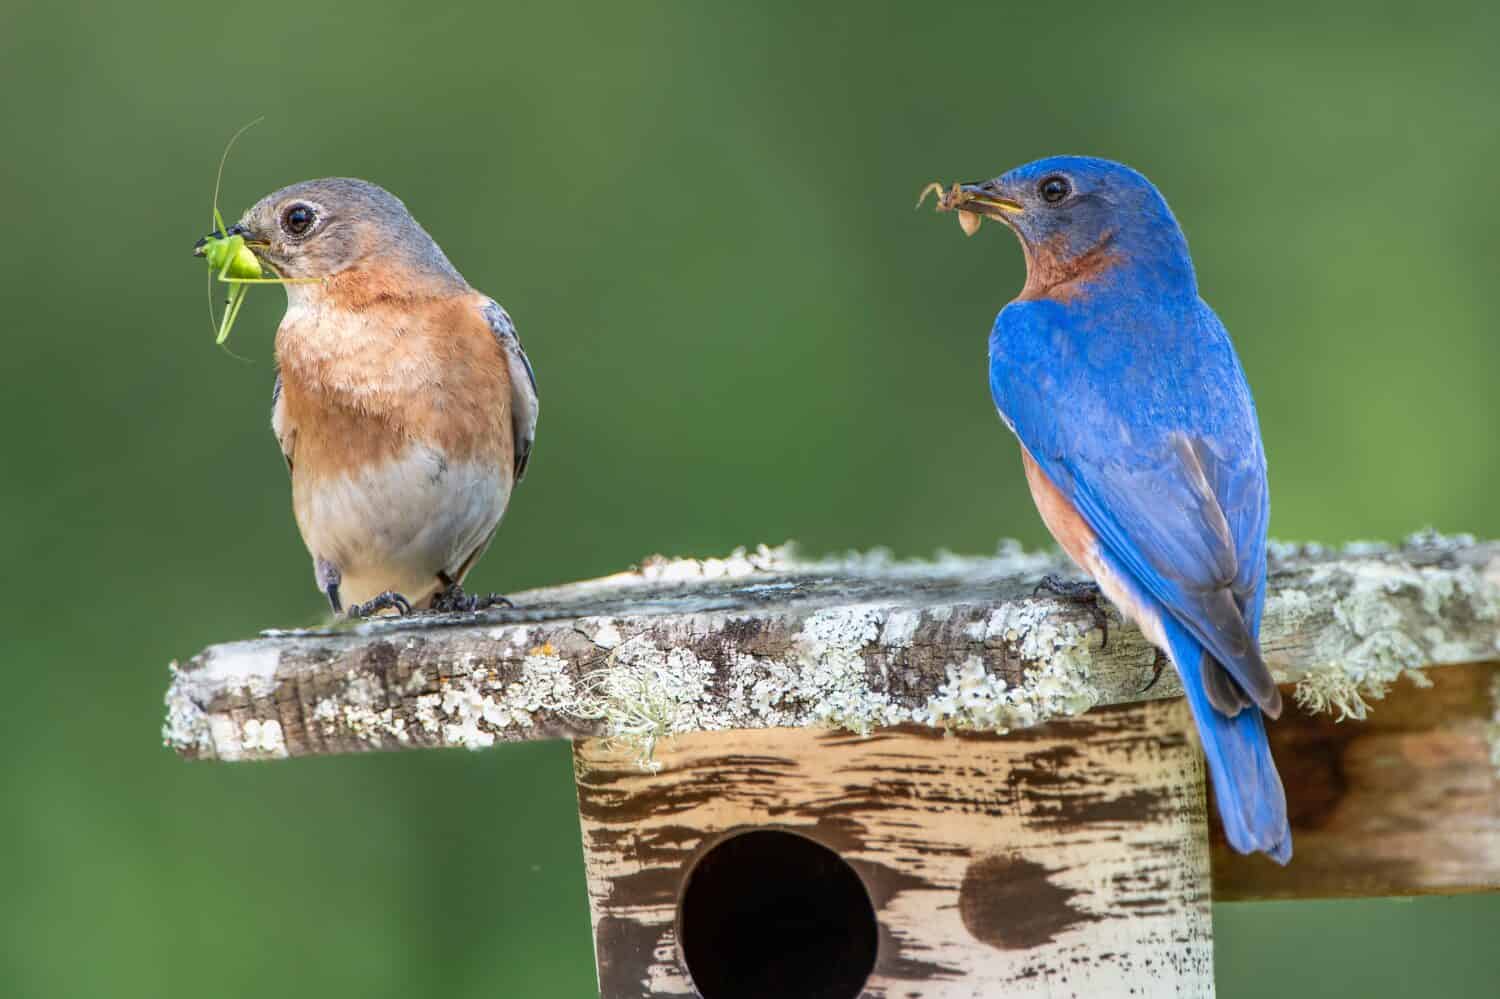 Male and Female Bluebirds with Food for Nestlings in Nesting Box in South Central Louisiana